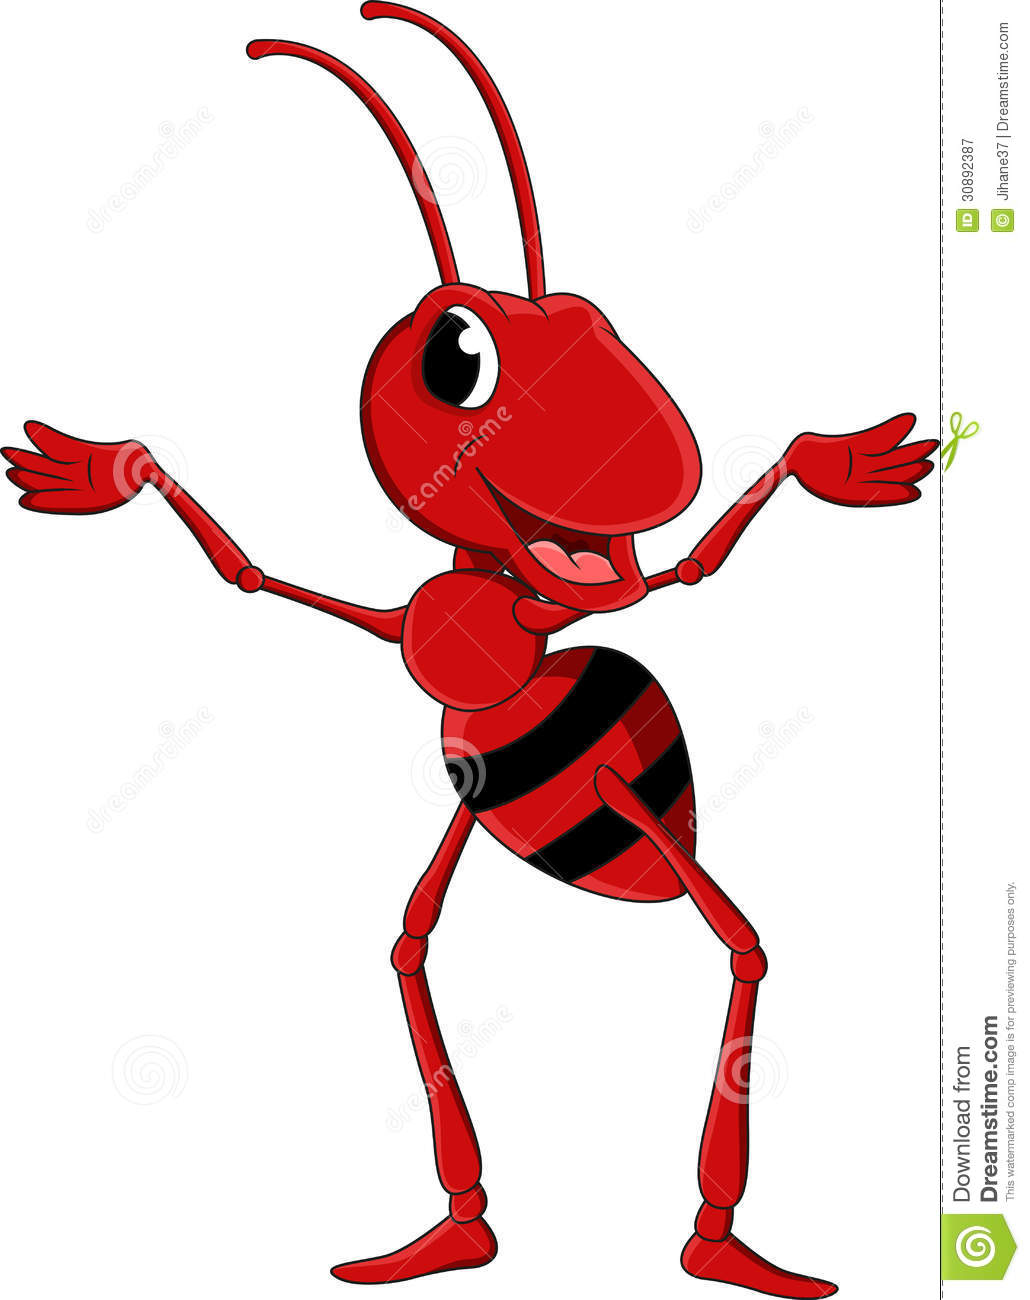 Cute Red Ant Cartoon Royalty Free Stock Photography   Image  30892387